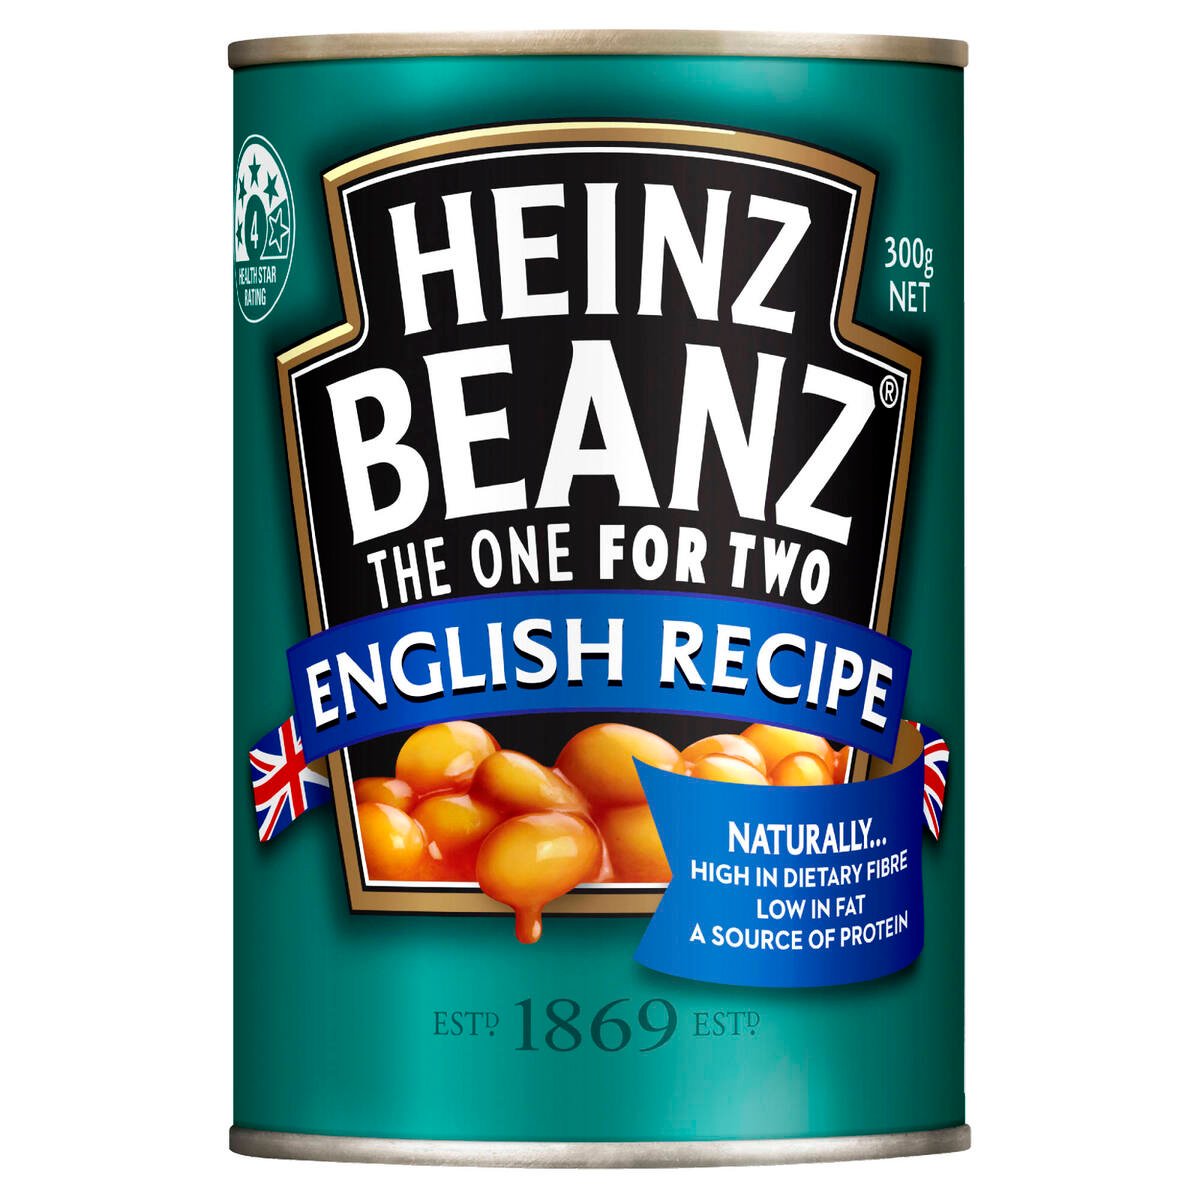 Buy Heinz Beanz English Recipe 300 g Online at Best Price | Canned Baked Beans | Lulu Kuwait in Saudi Arabia